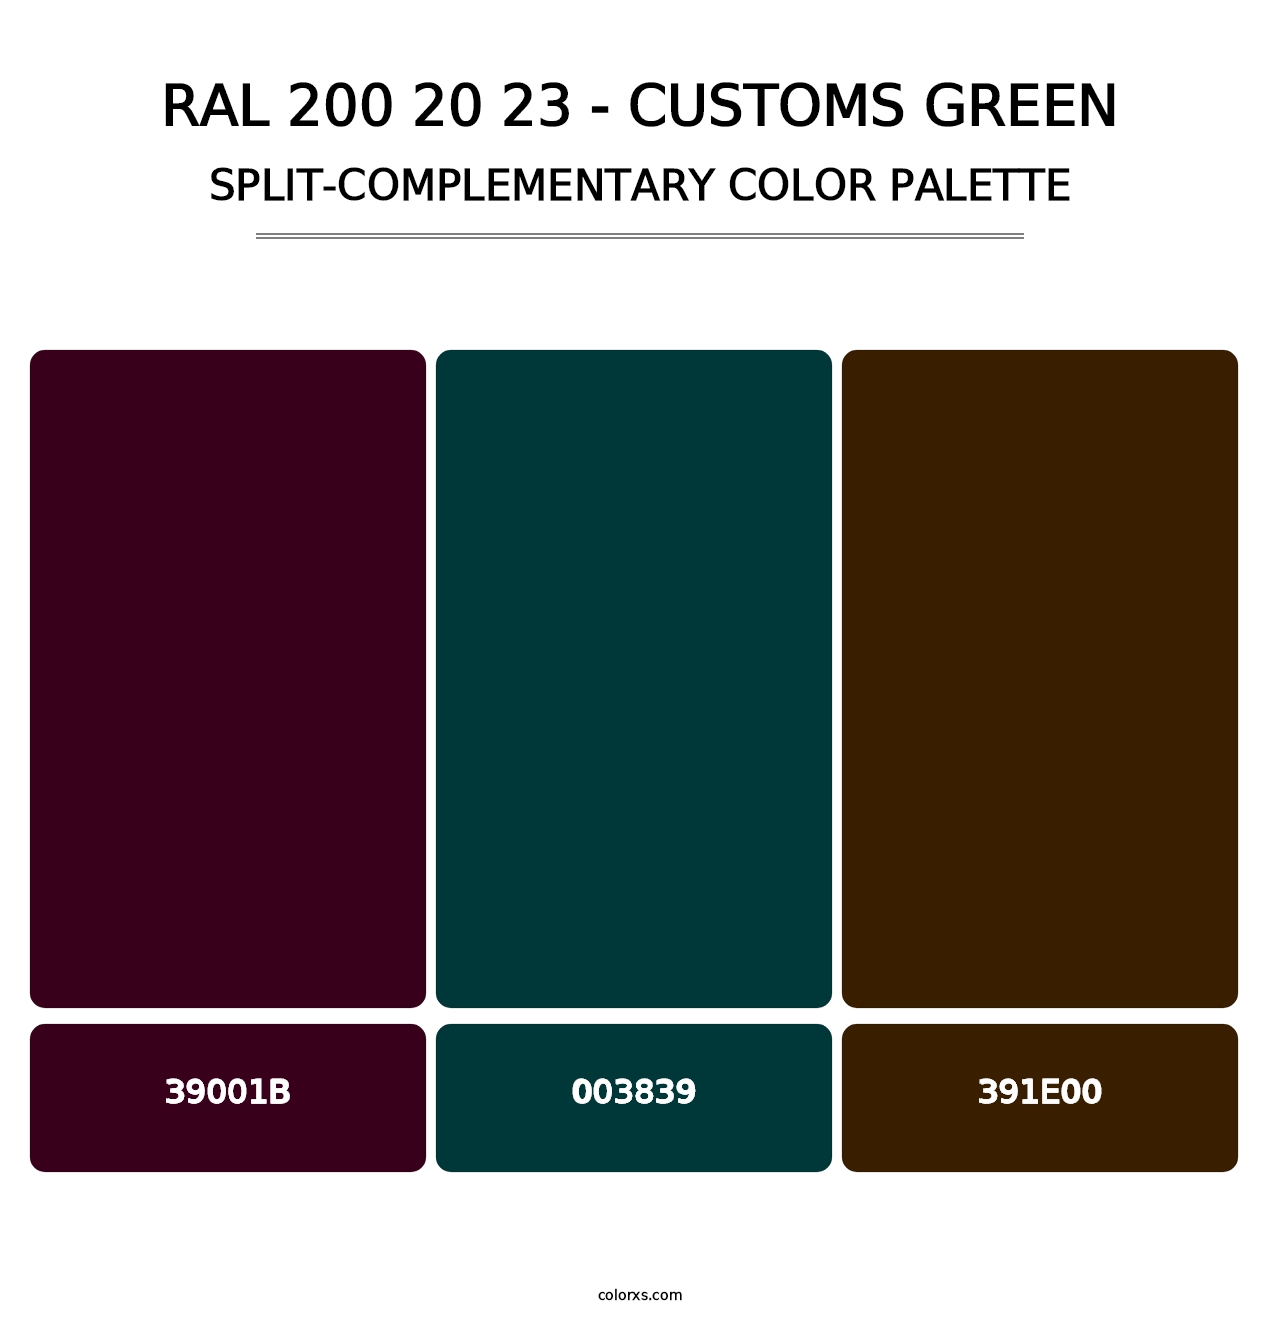 RAL 200 20 23 - Customs Green - Split-Complementary Color Palette